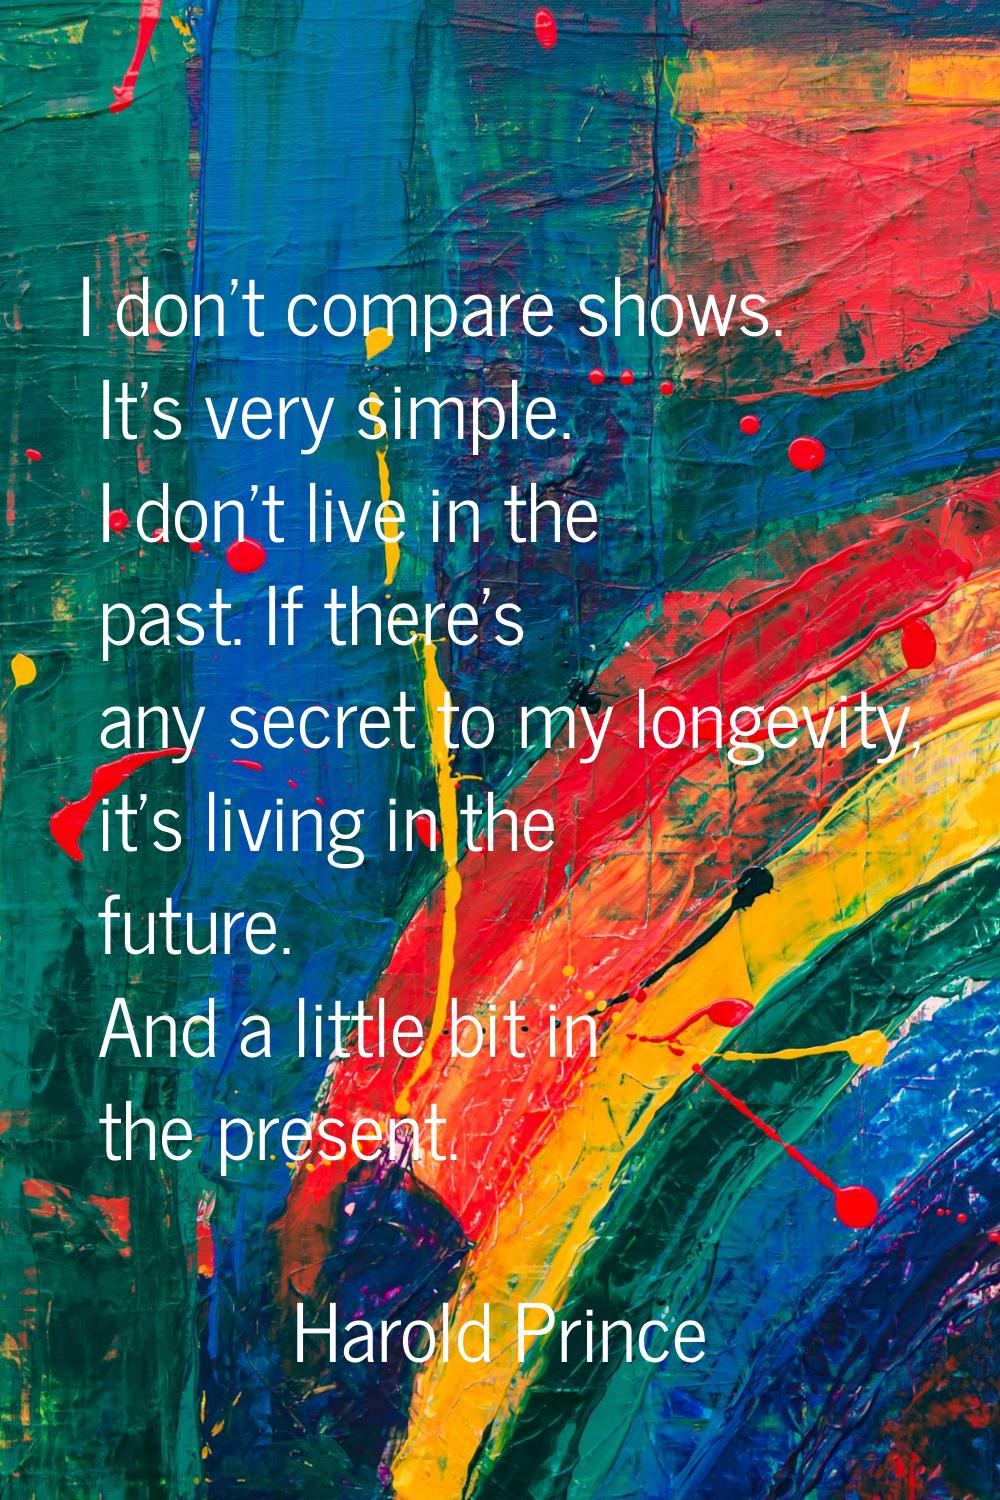 I don't compare shows. It's very simple. I don't live in the past. If there's any secret to my long